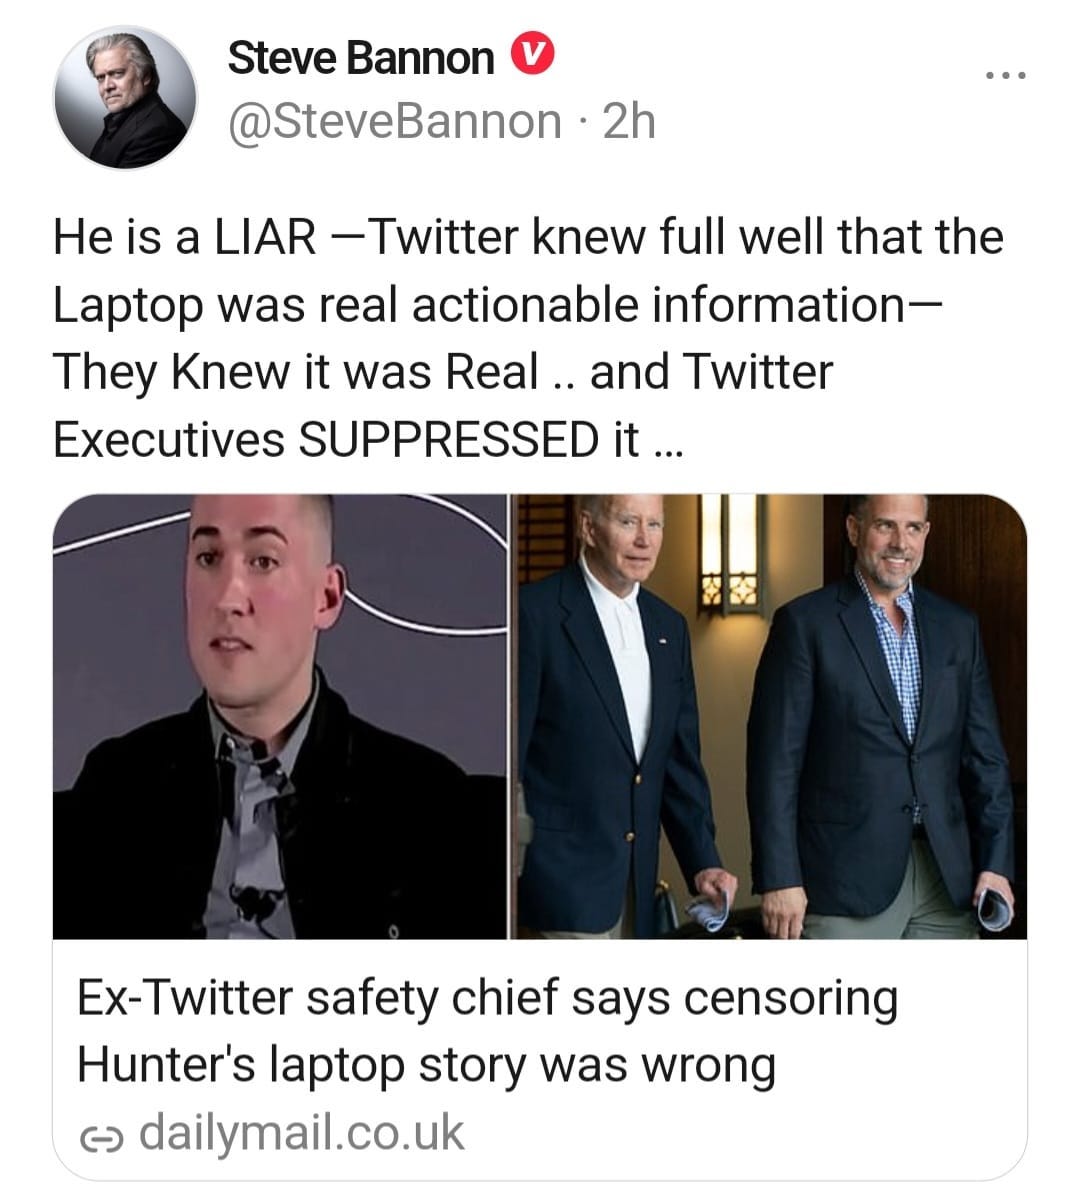 May be an image of 4 people and text that says 'Steve Bannon @SteveBannon 2h He is a LIAR -Twitter knew full well that the Laptop was real actionable information- They Knew it was Real. and Twitter Executives SUPPRESSED it... it Ex-Twitter safety chief says censoring Hunter's laptop story was wrong ૯ dailymail.co.uk'